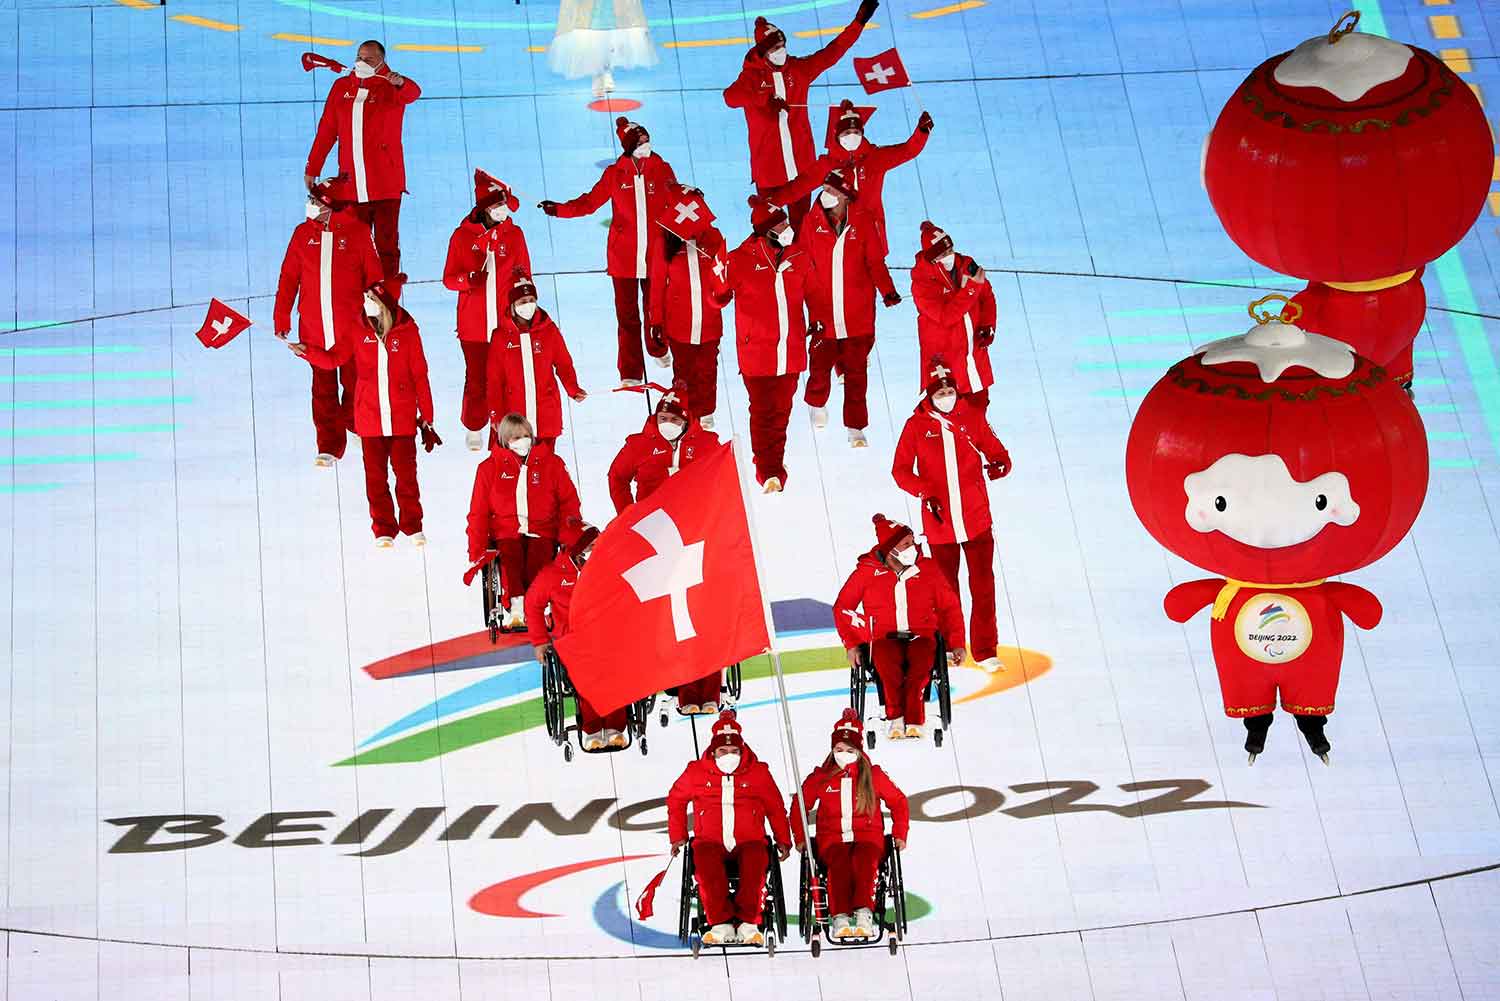 Athletes in Swiss uniforms, some with Swiss flags and some using wheelchairs, in a stadium with Beijing 2022 painted on the floor